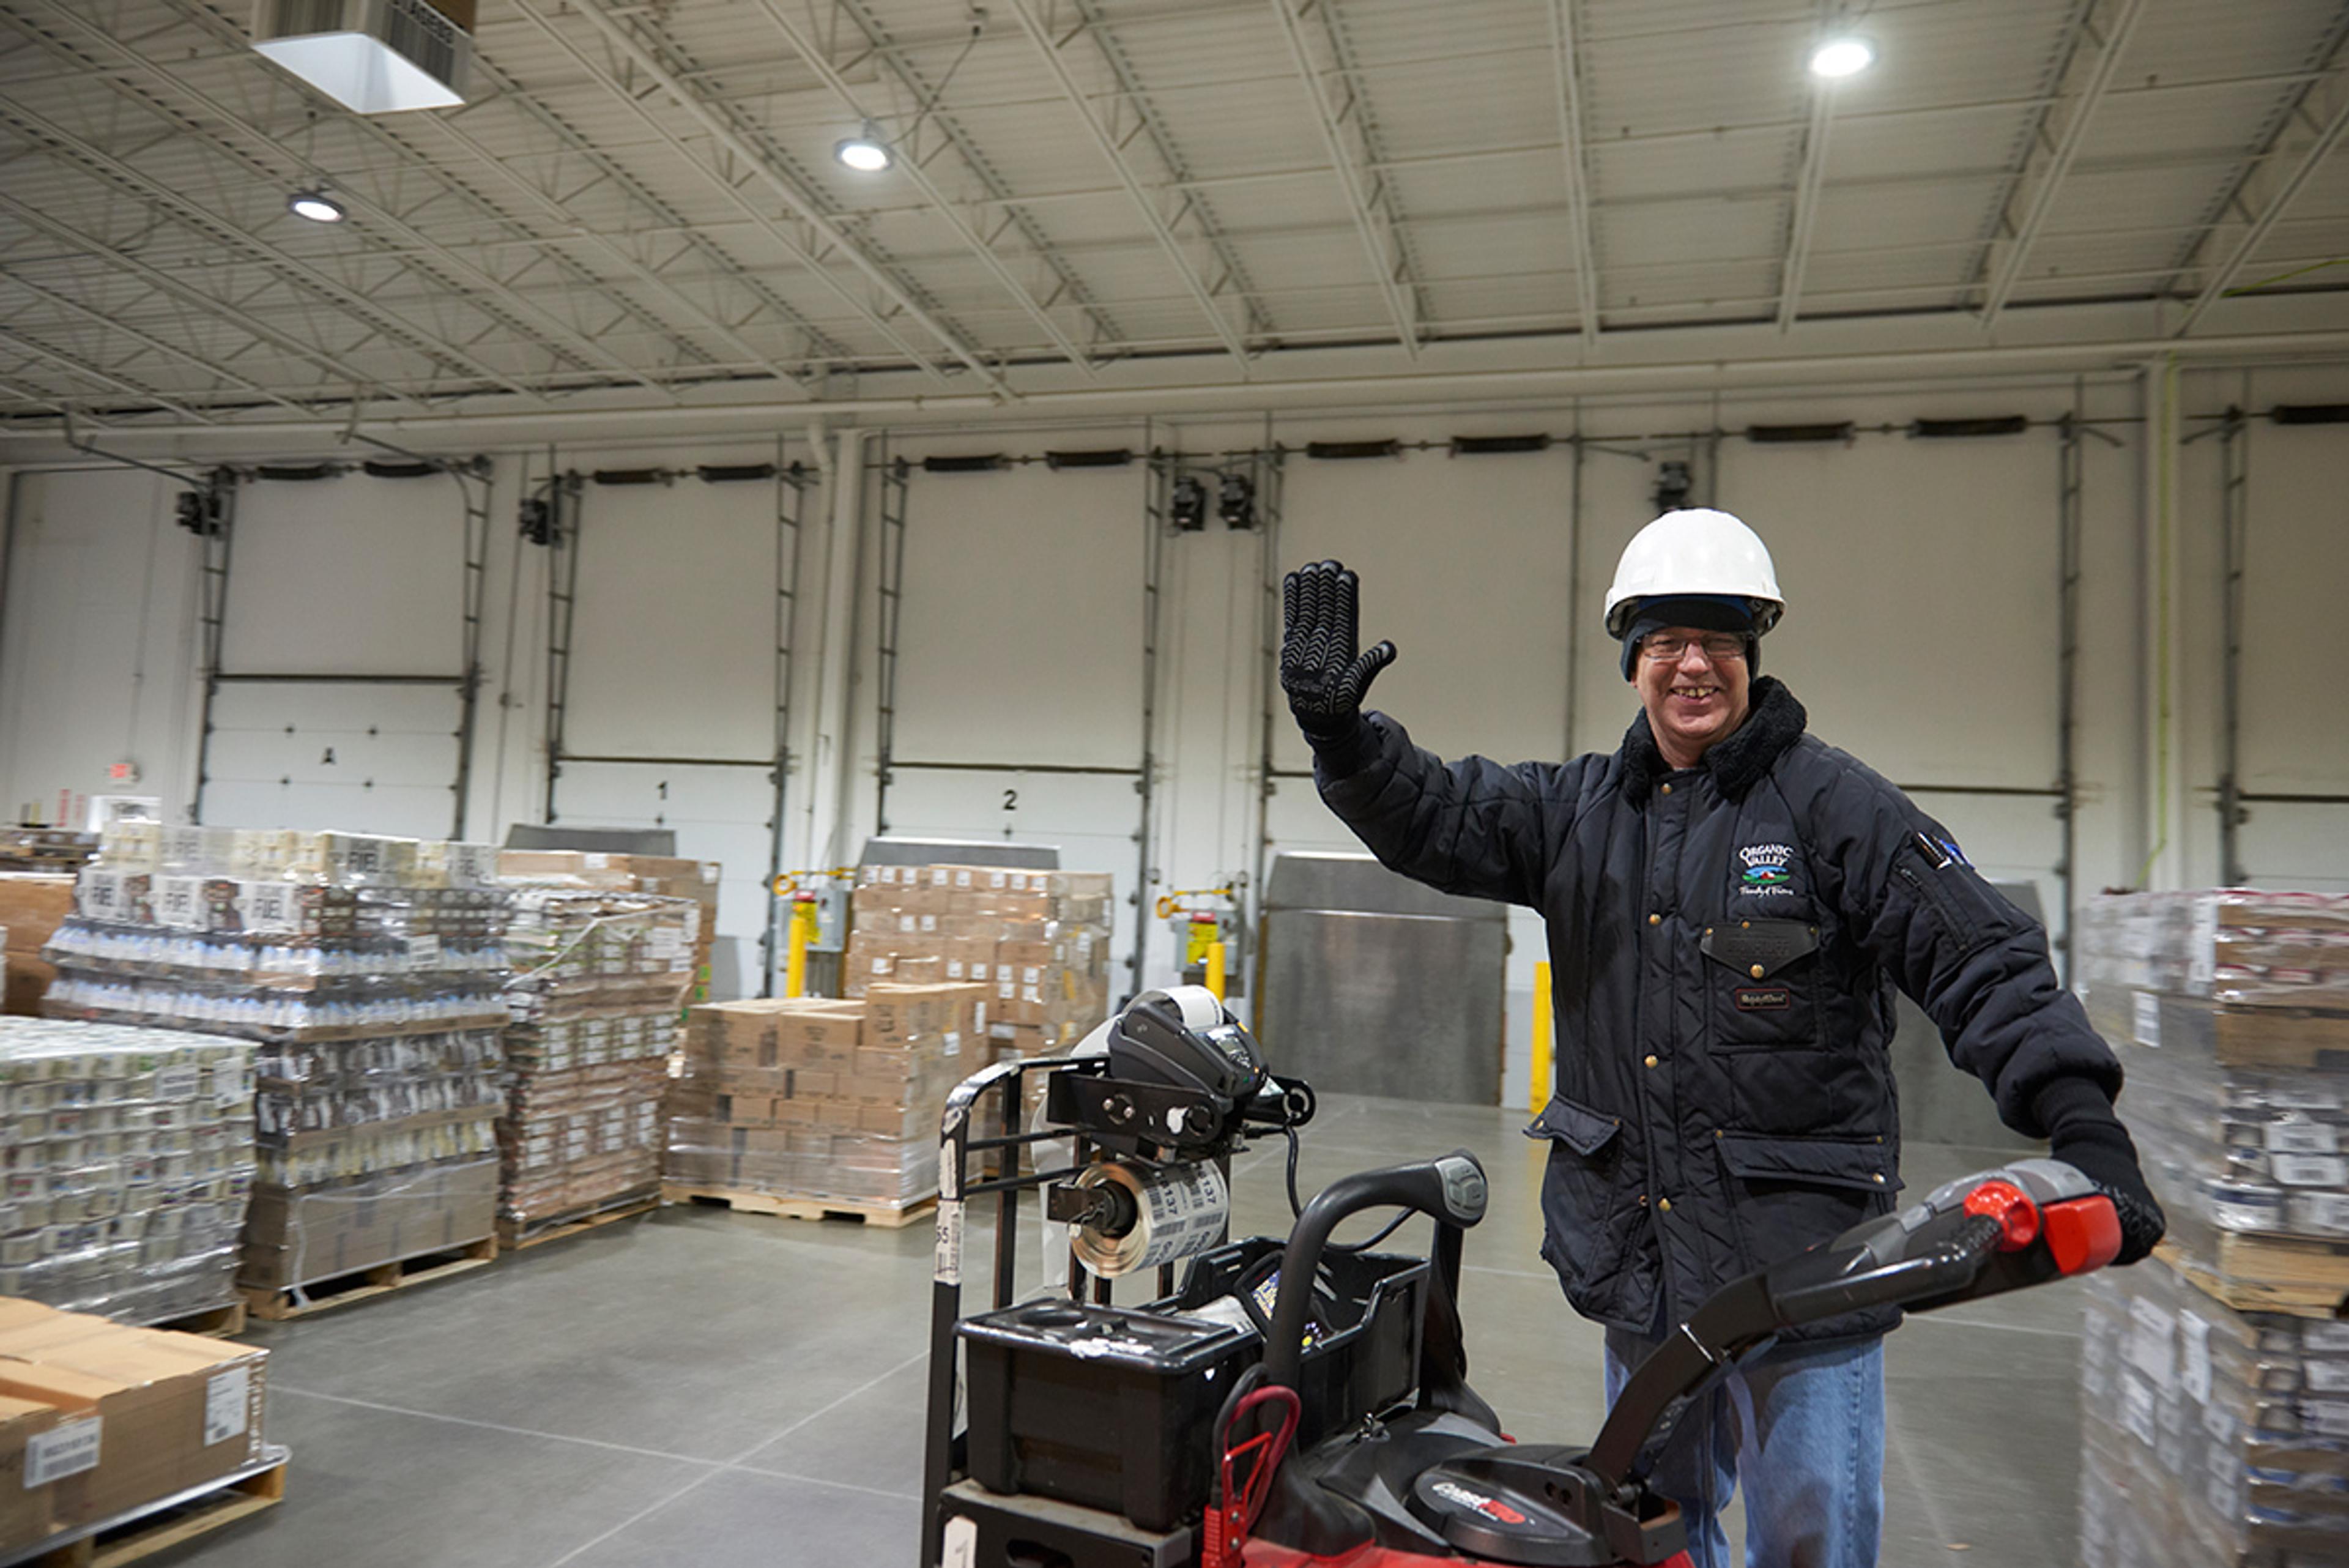 Organic Valley employee waves on a warehouse cart at the distribution center in Cashton, Wisconsin.